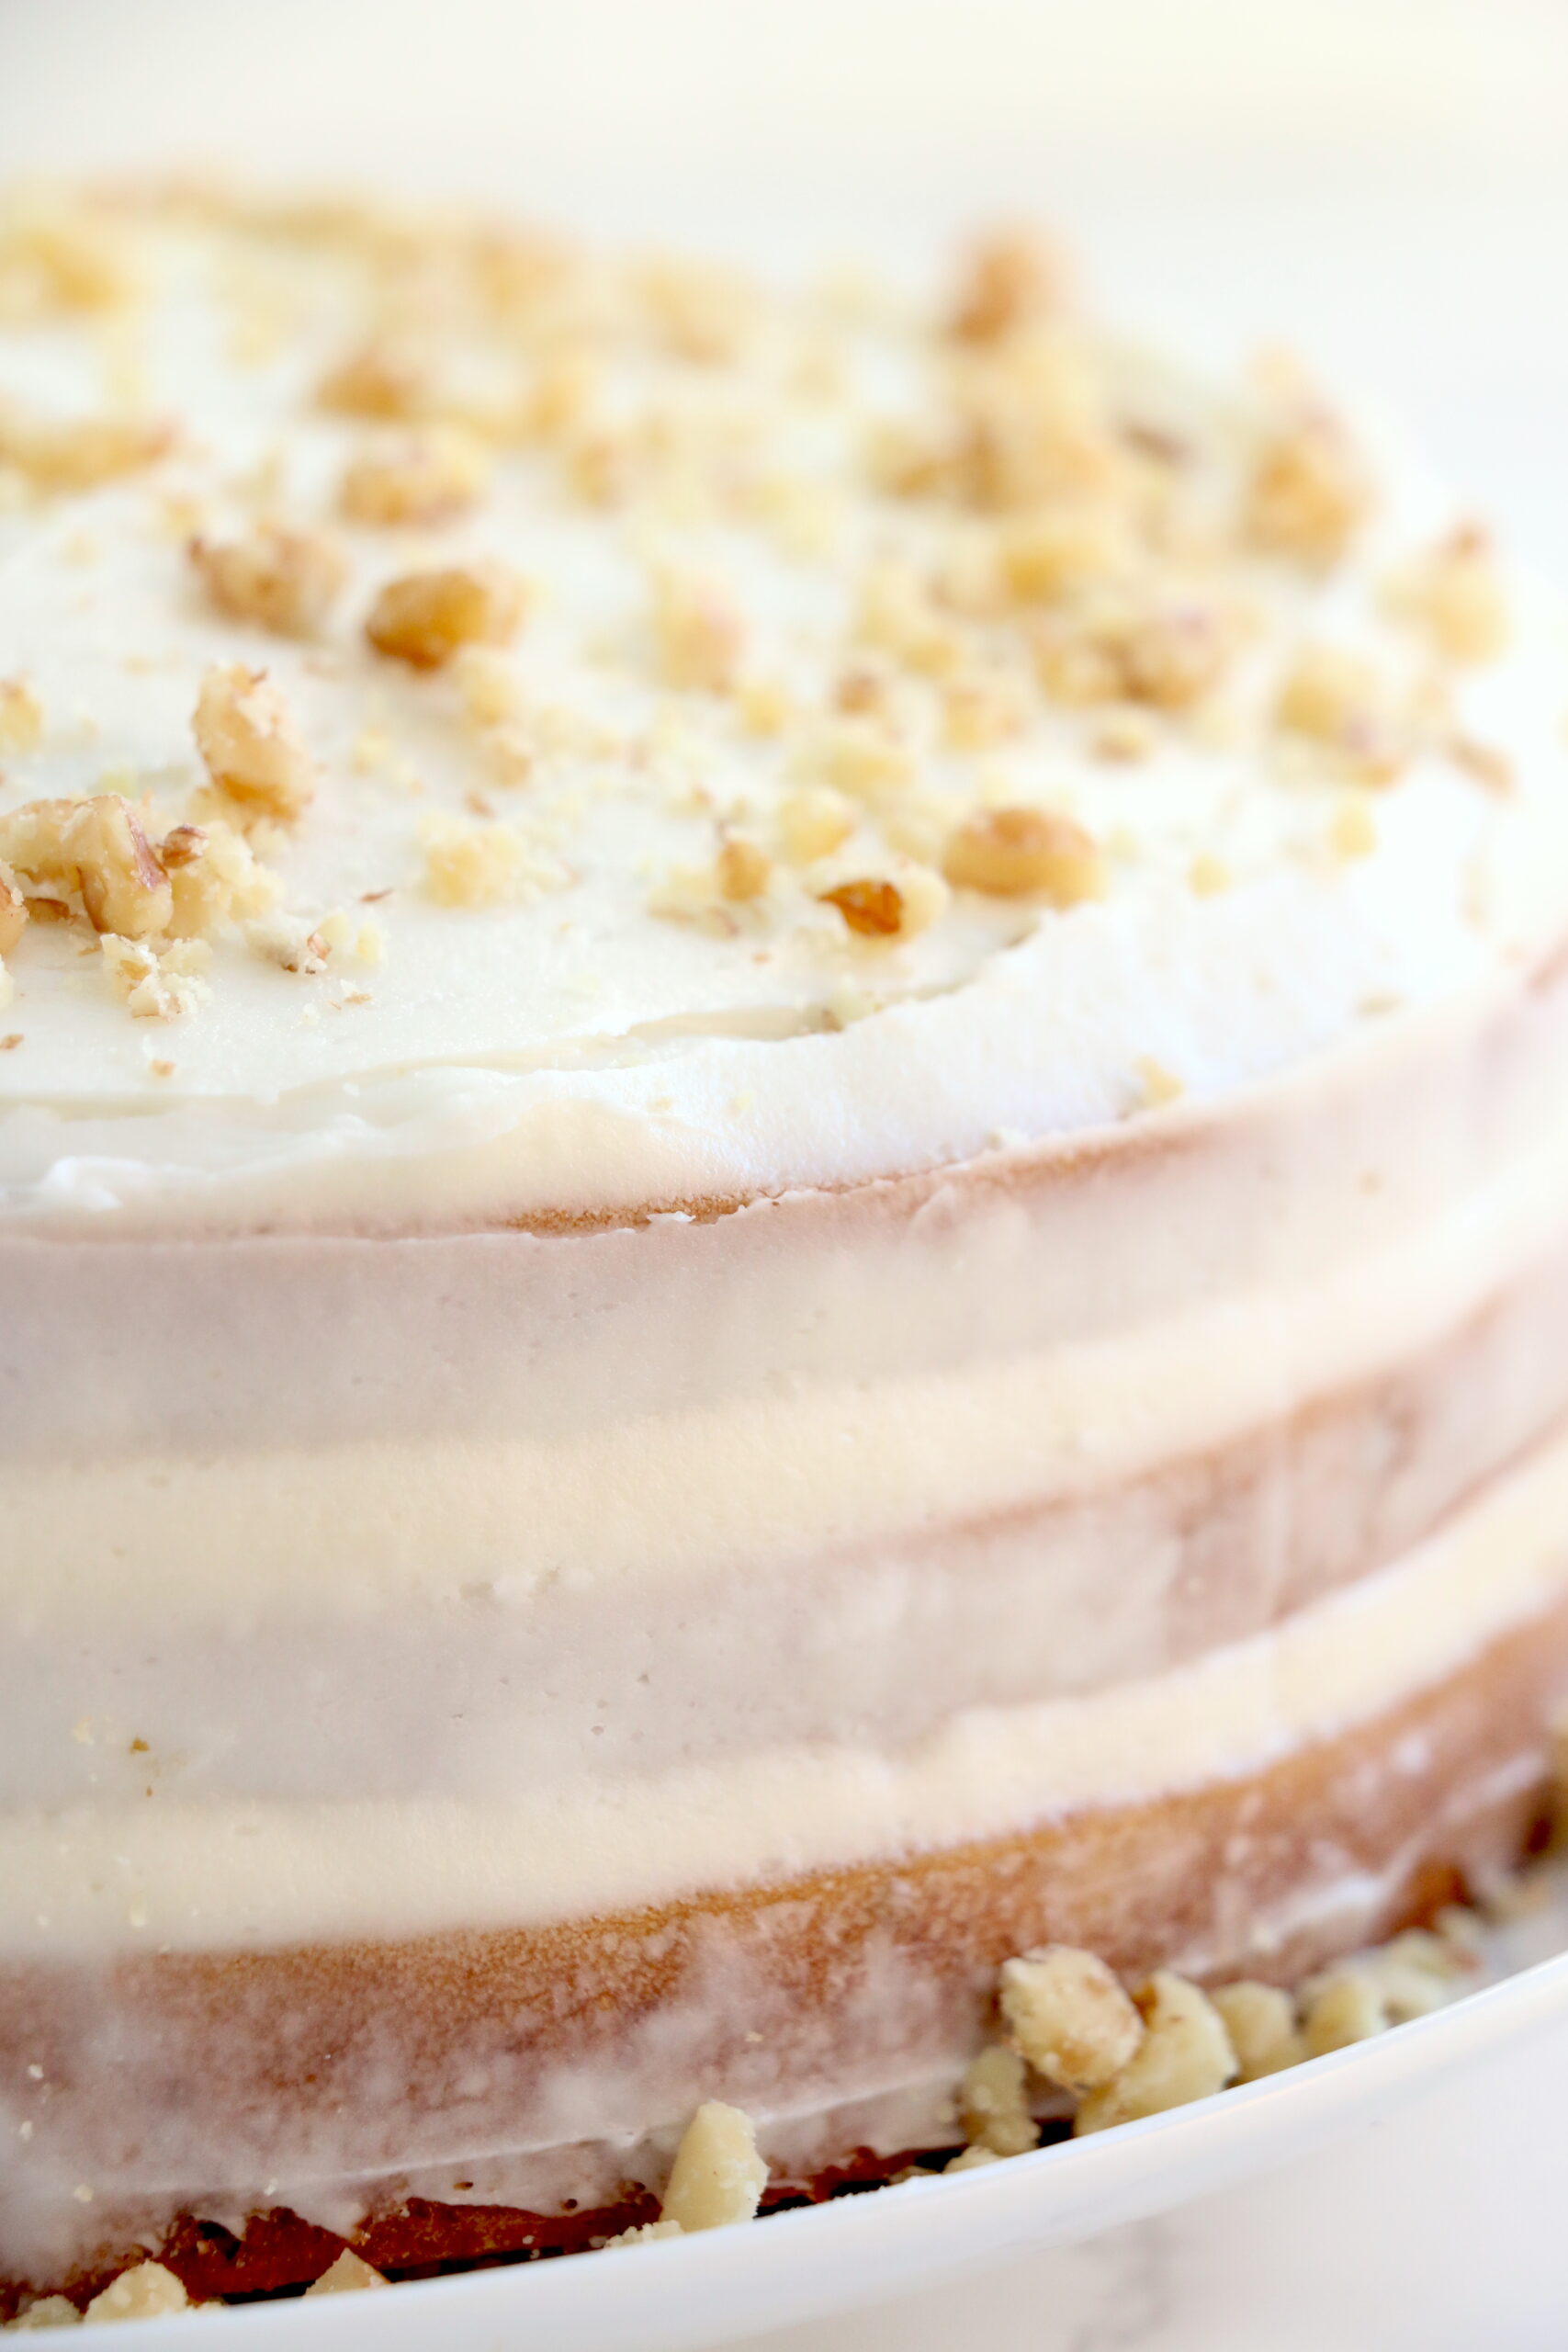 Closeup shot of fully frosted nake carrot cake on cake stand